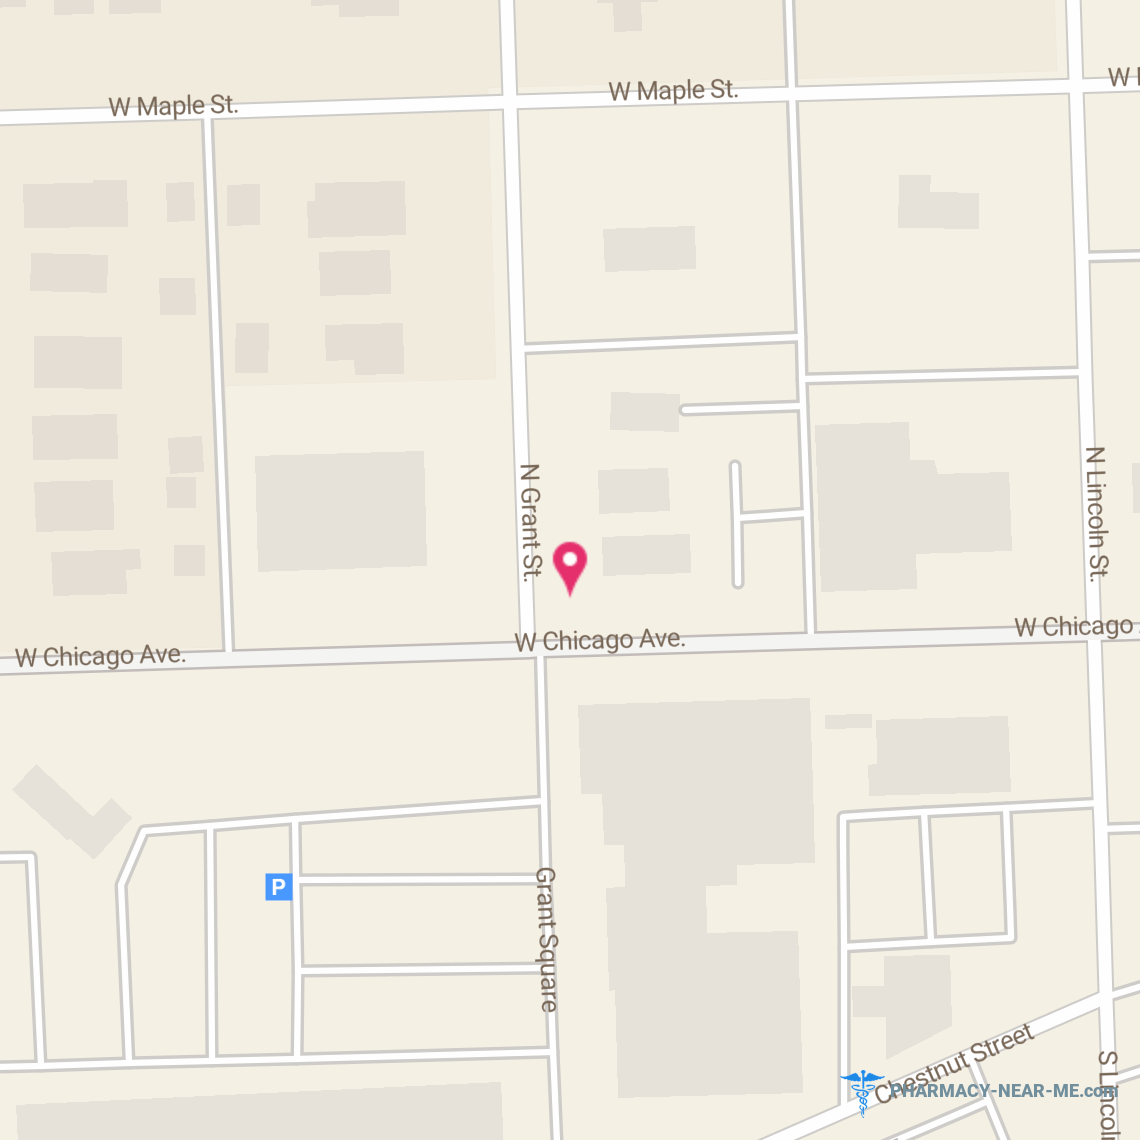 WALGREENS #01670 - Pharmacy Hours, Phone, Reviews & Information: 15 Grant Square, Hinsdale, Illinois 60521, United States